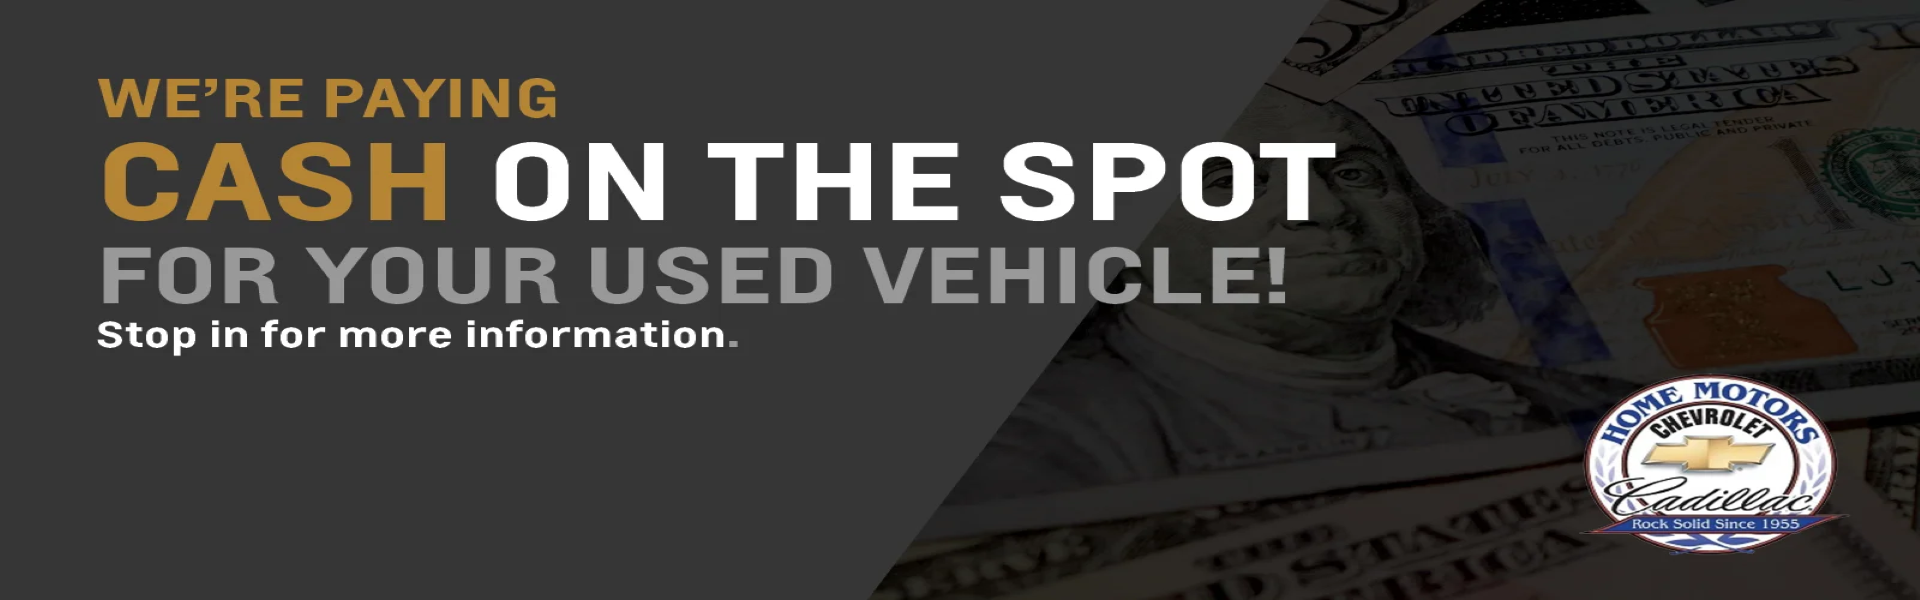 Cash on the spot for your used vehicle 